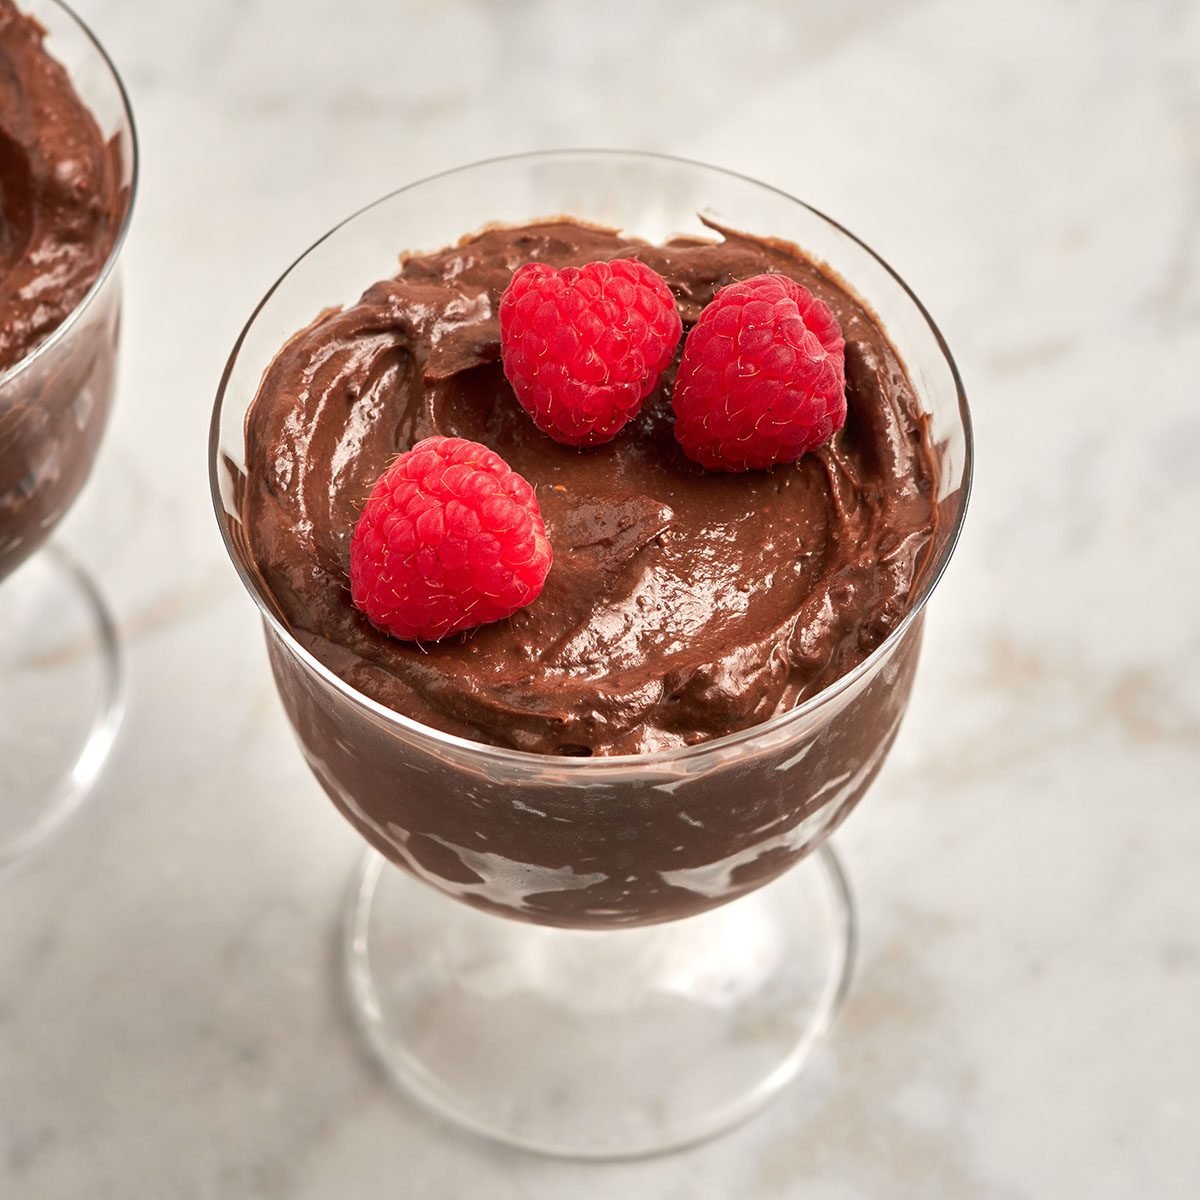 This rich and creamy vegan chocolate mousse by Taste of Home is so satisfying you’d never guess it’s dairy-free.